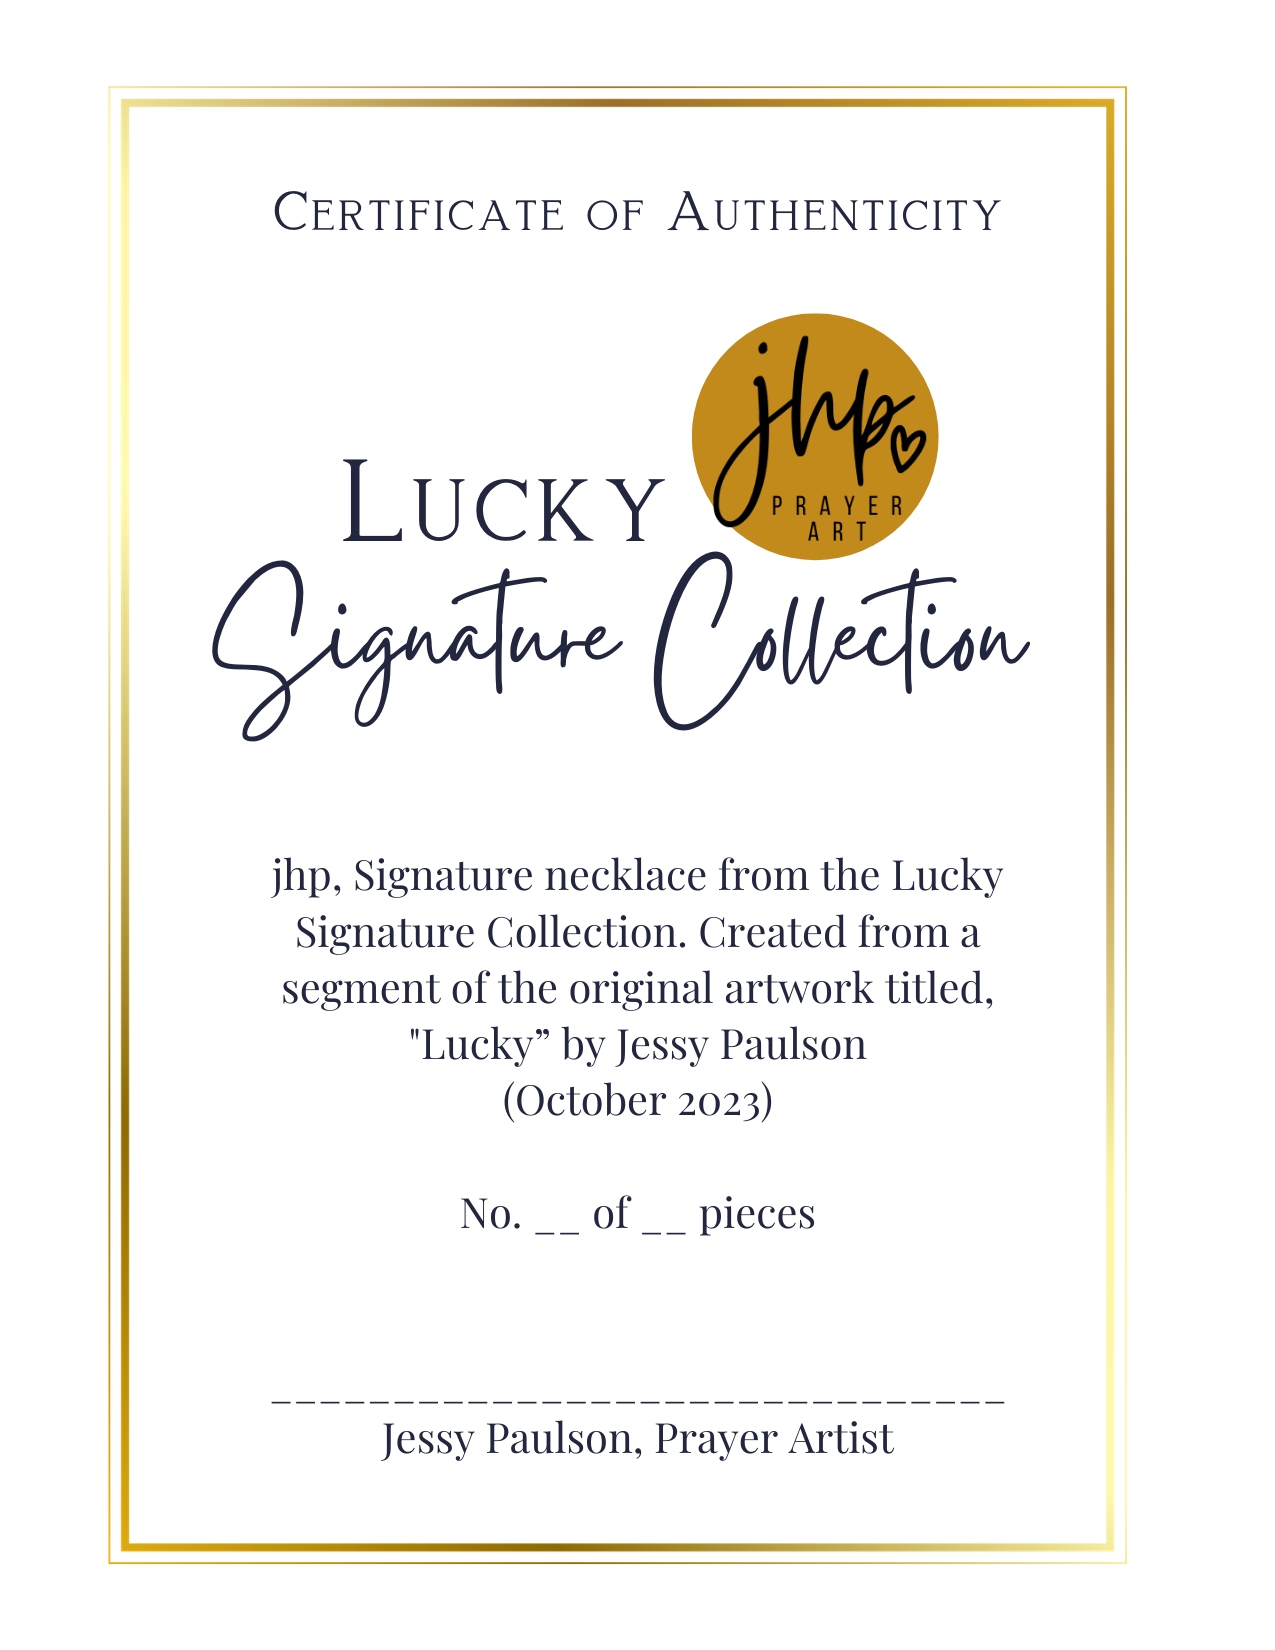 Lucky, a jhp Signature Necklace II